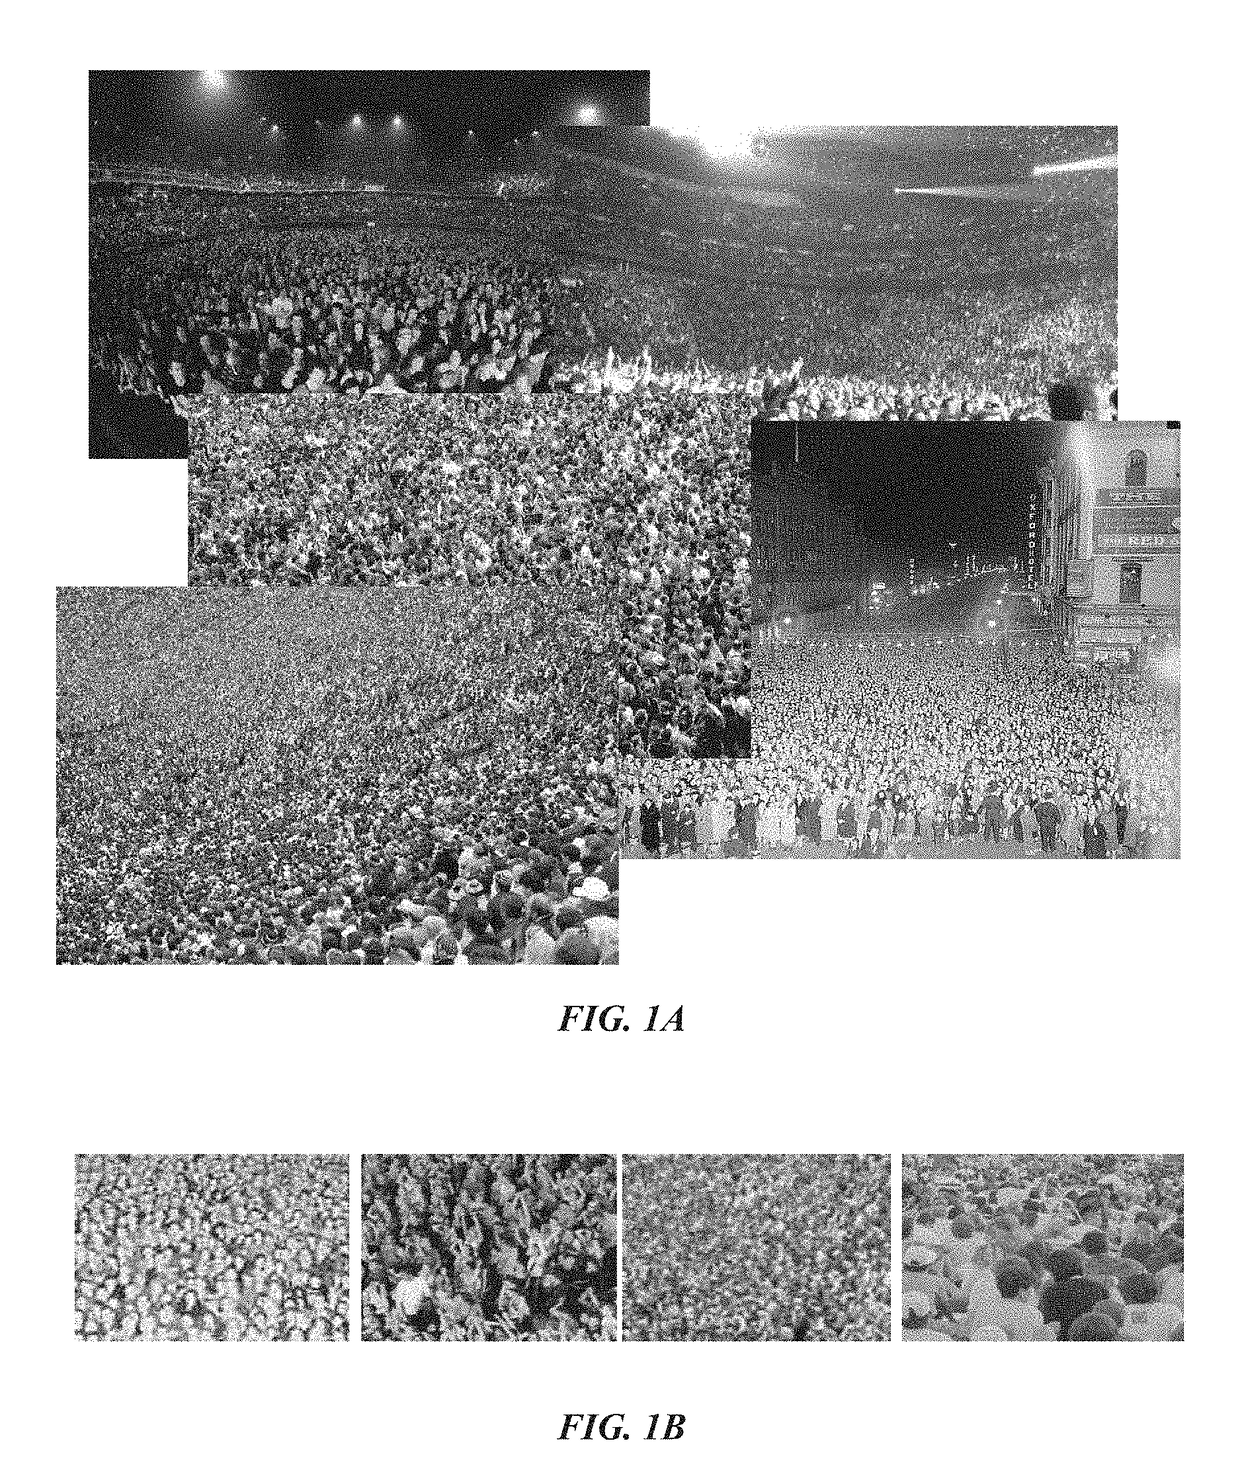 Multi-Source, Multi-Scale Counting in Dense Crowd Images